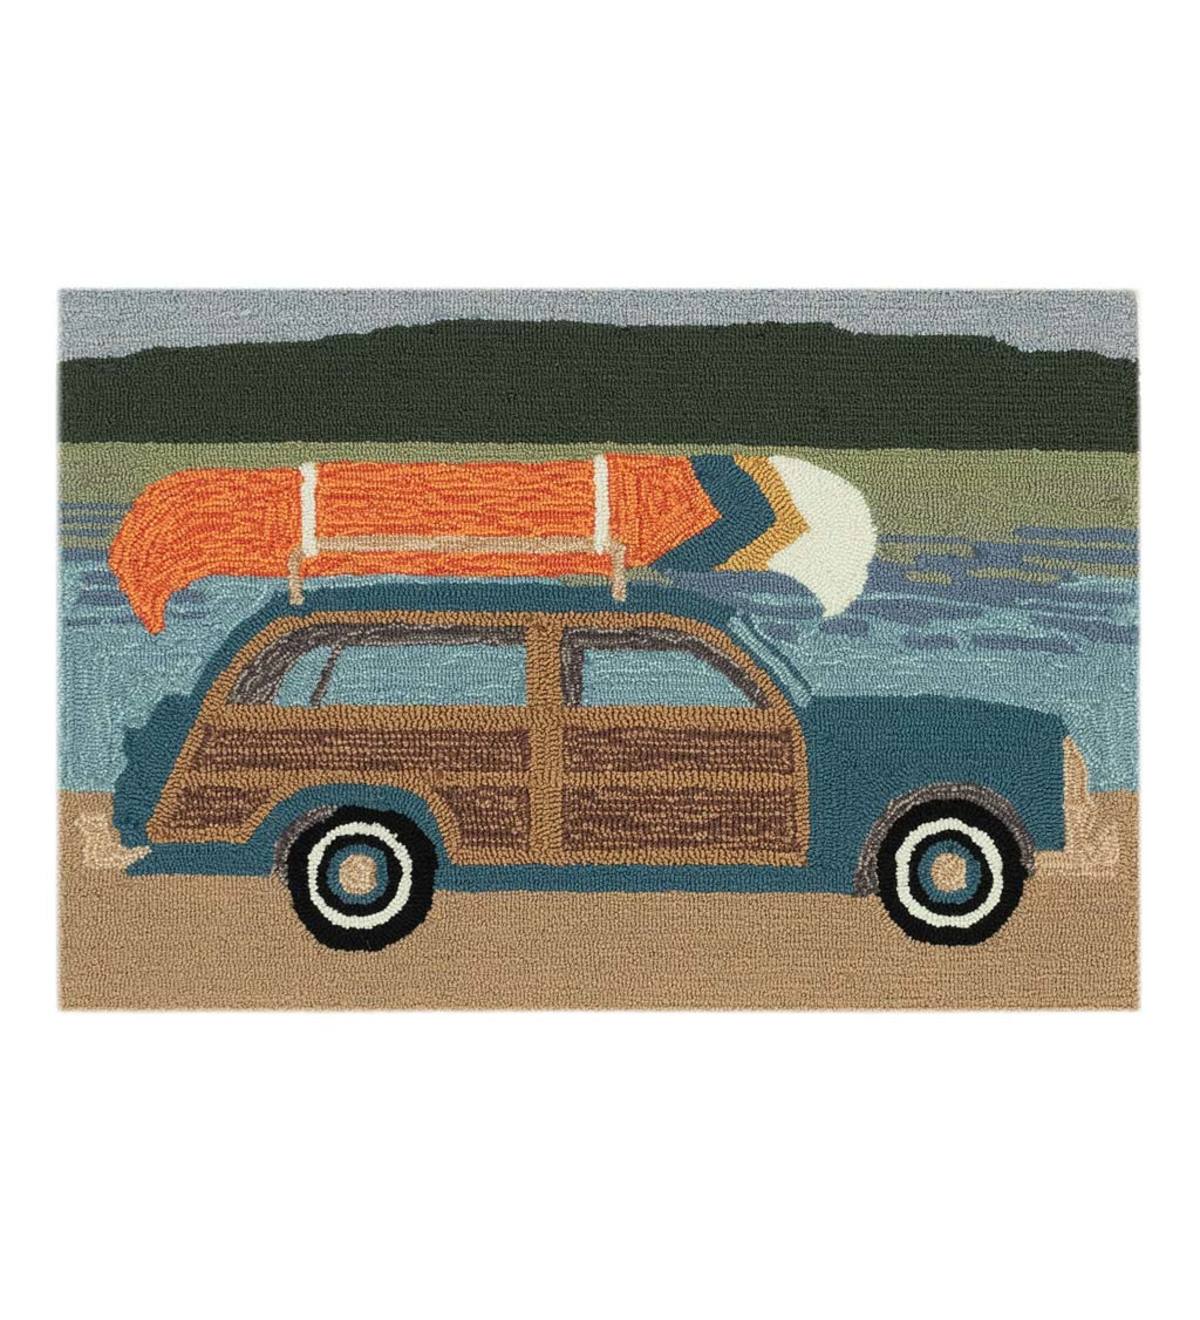 Indoor/Outdoor Synthetic Blend Camping Trip Rug, 24" x 36"